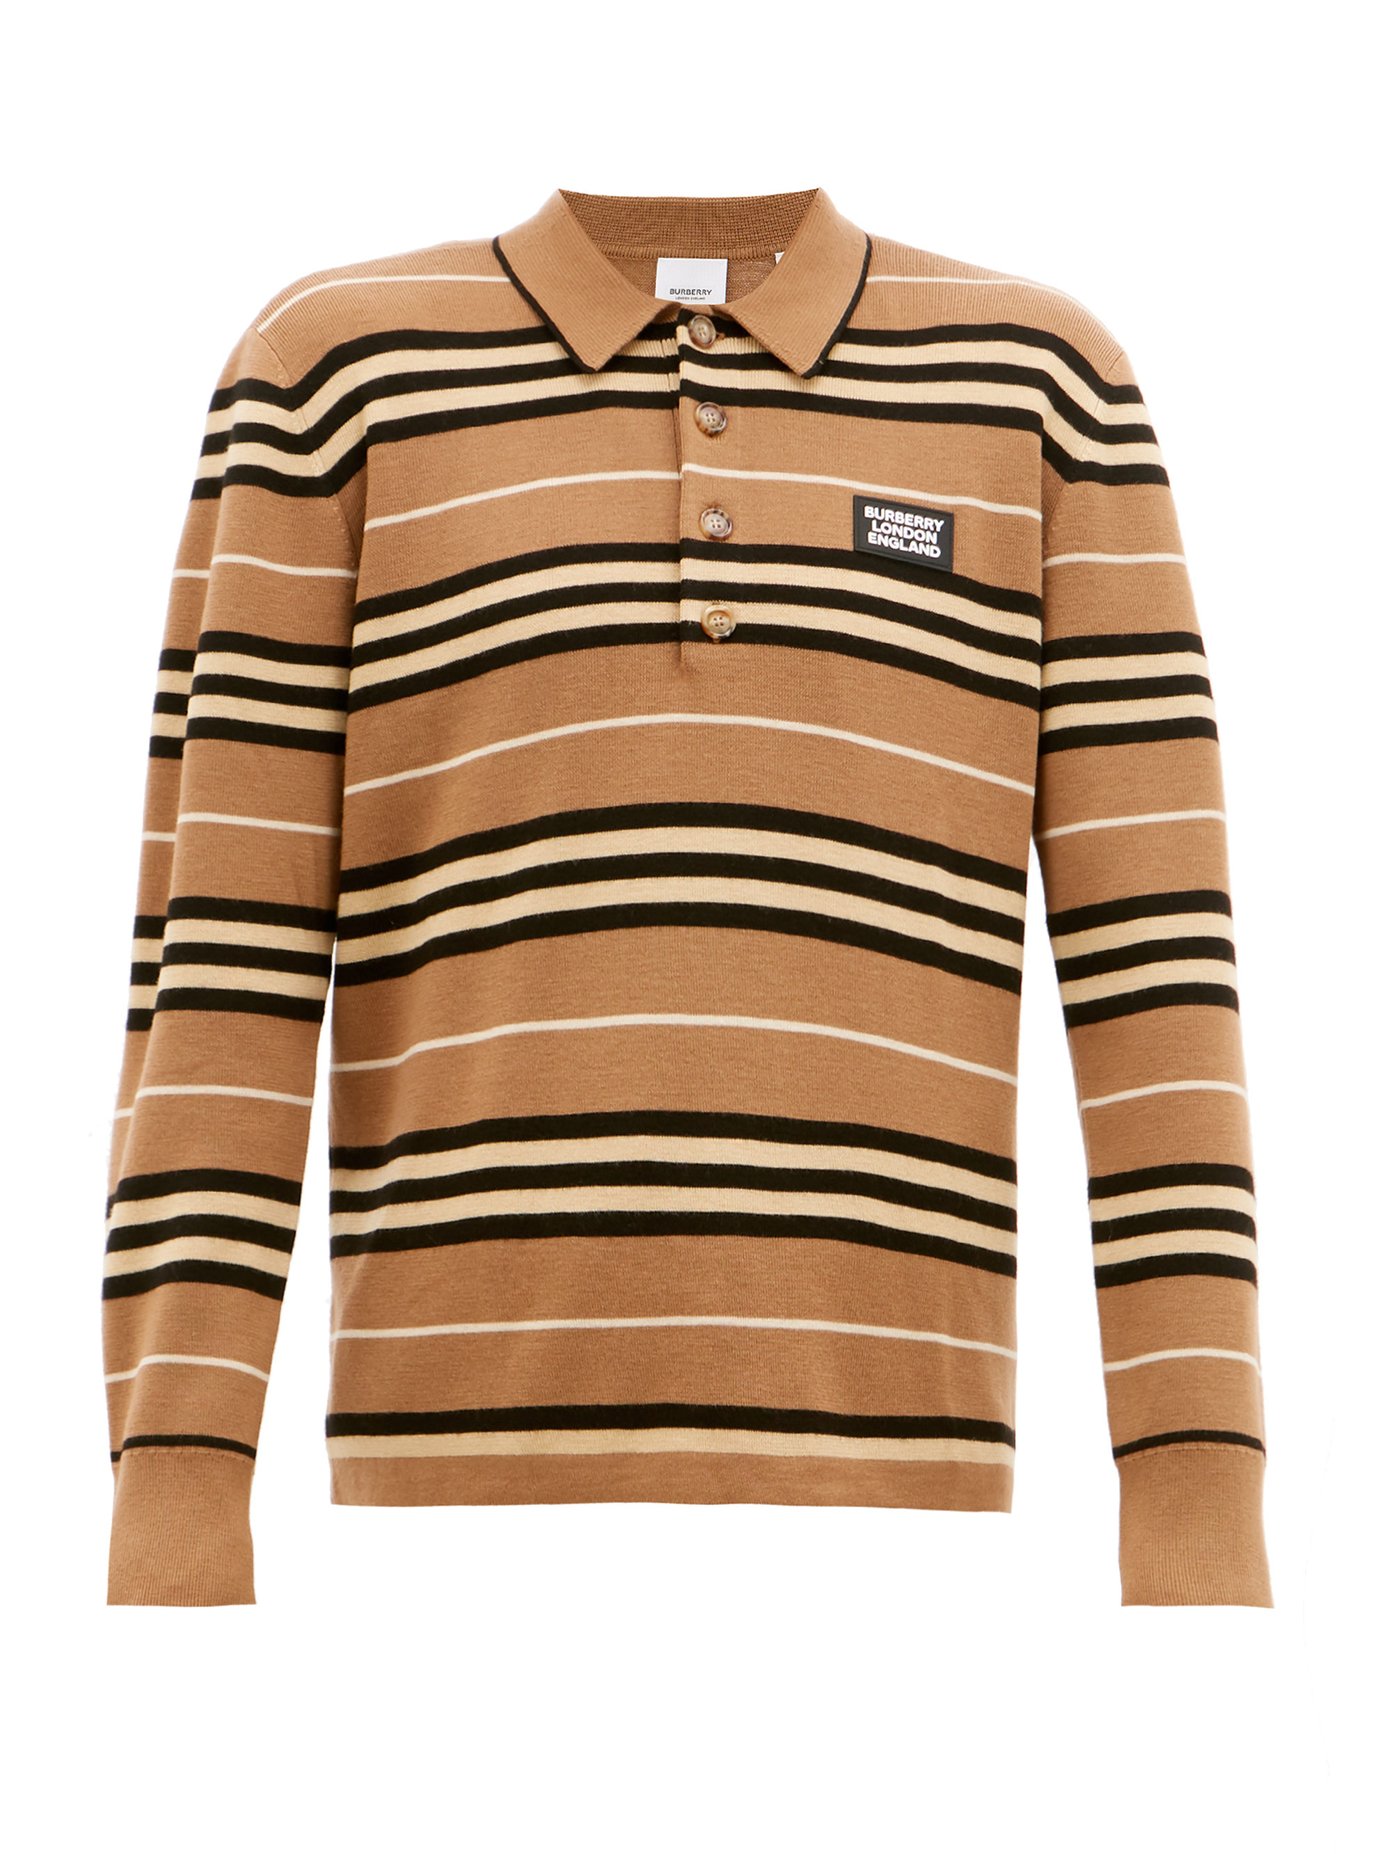 where to buy burberry clothes